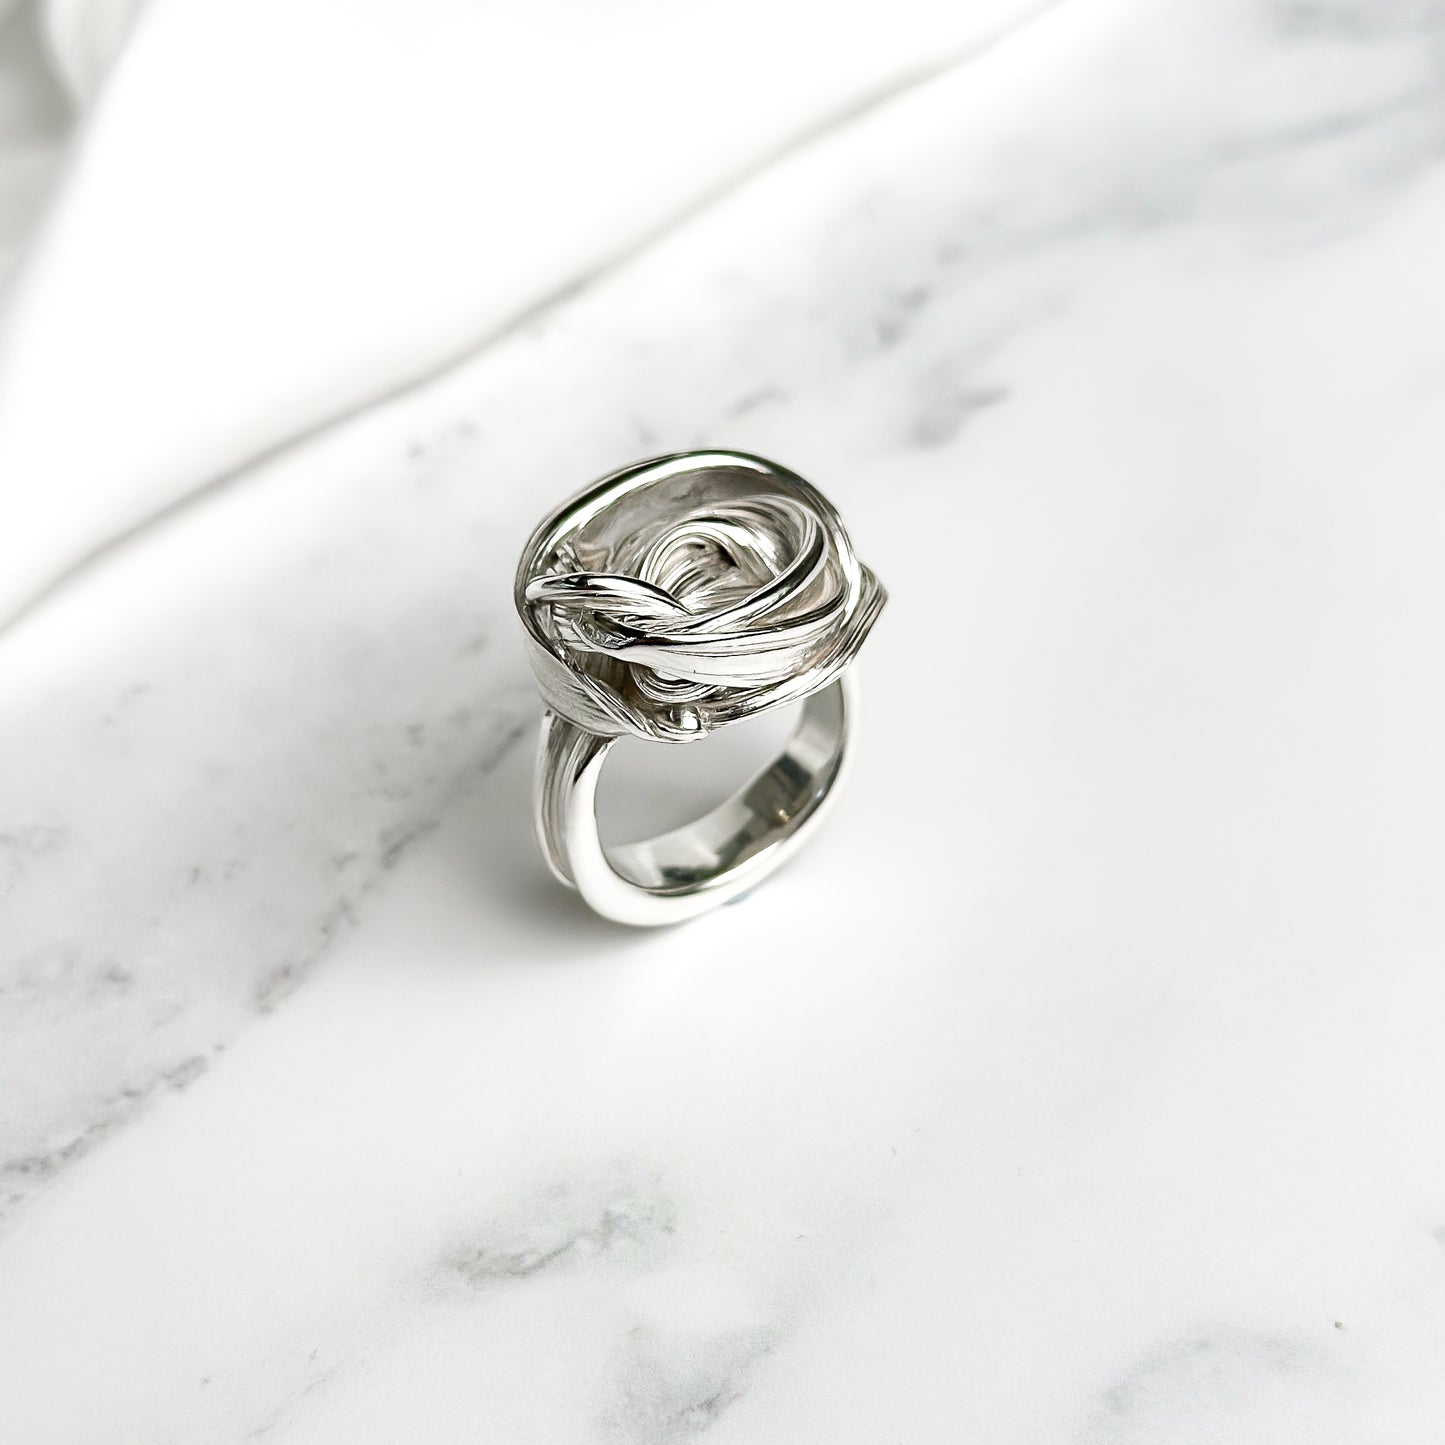 One of a kind Drift Sterling Silver Ring - Size M